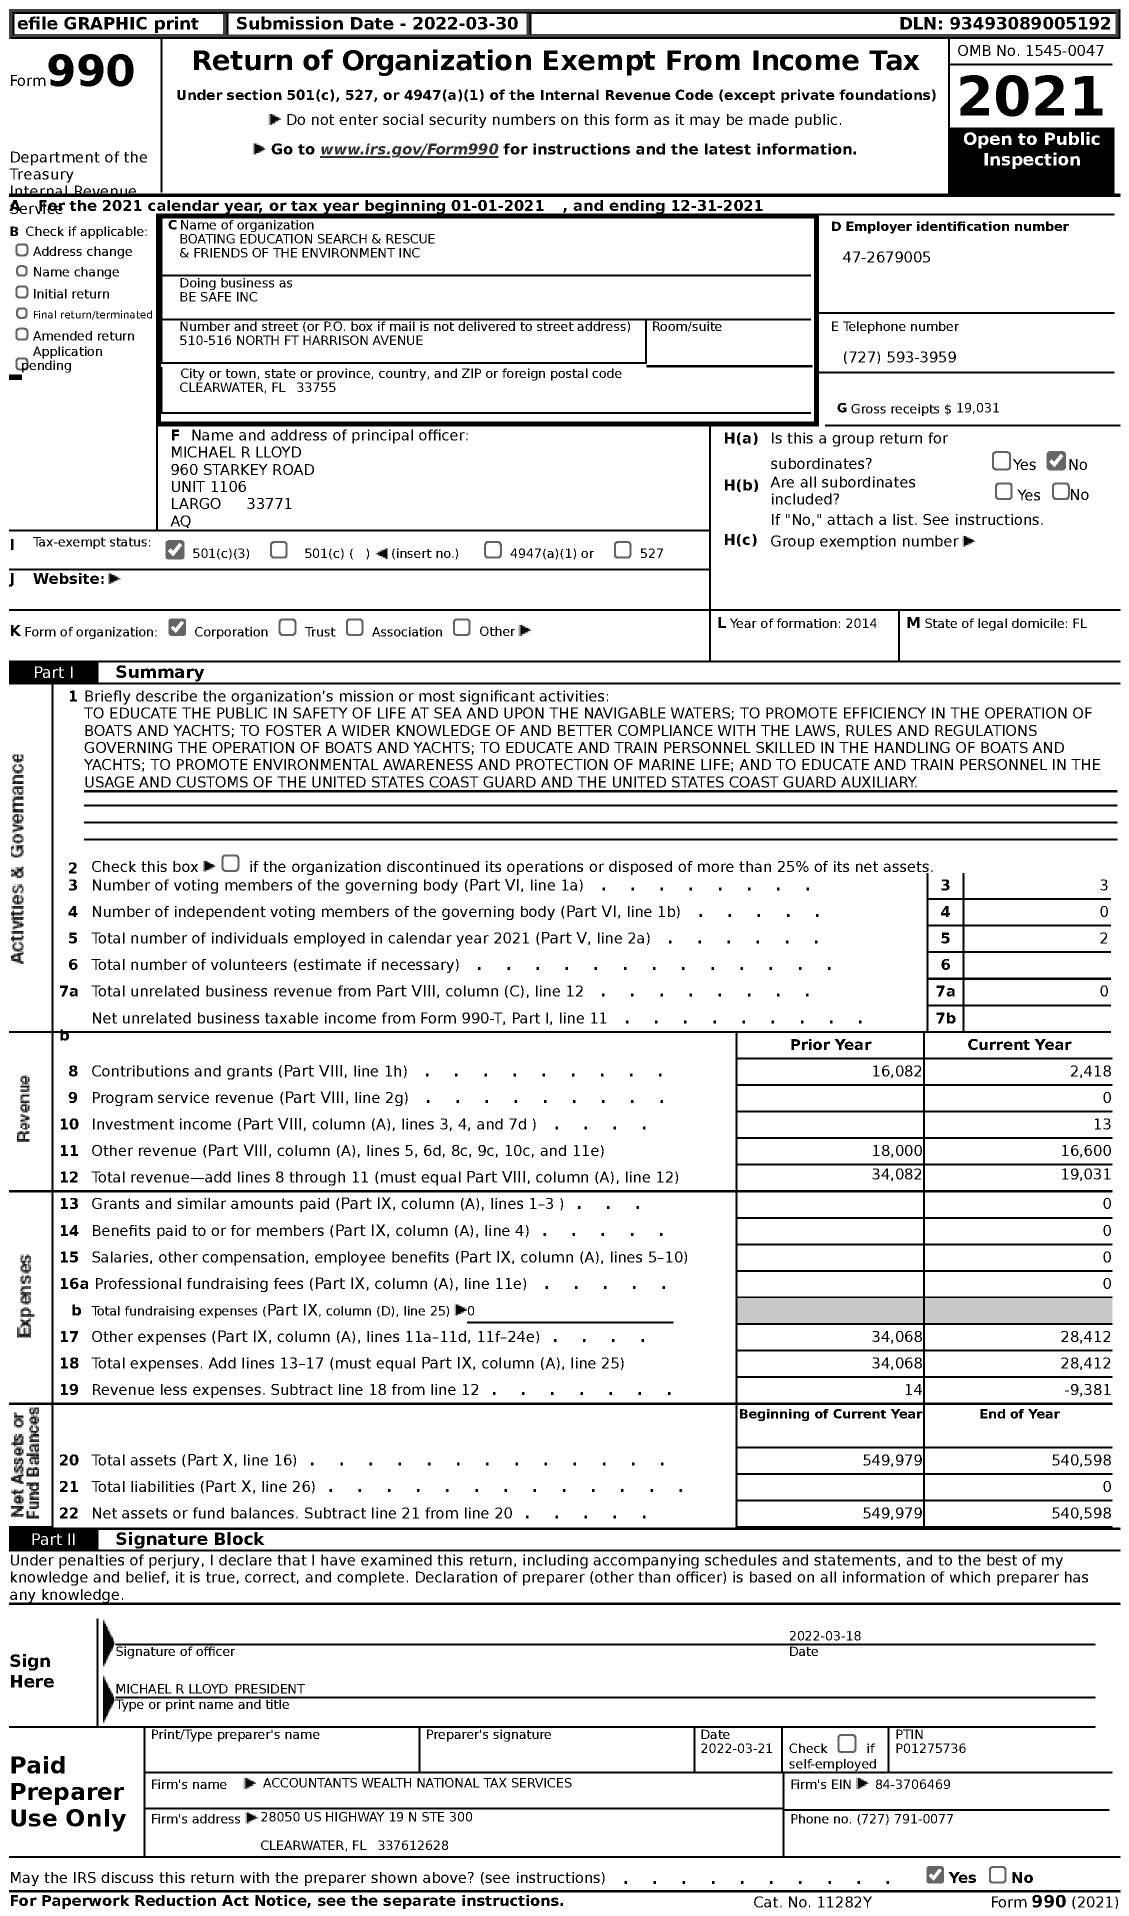 Image of first page of 2021 Form 990 for Be Safe / Boating Education Search & Rescue & Friends of the Environment Inc